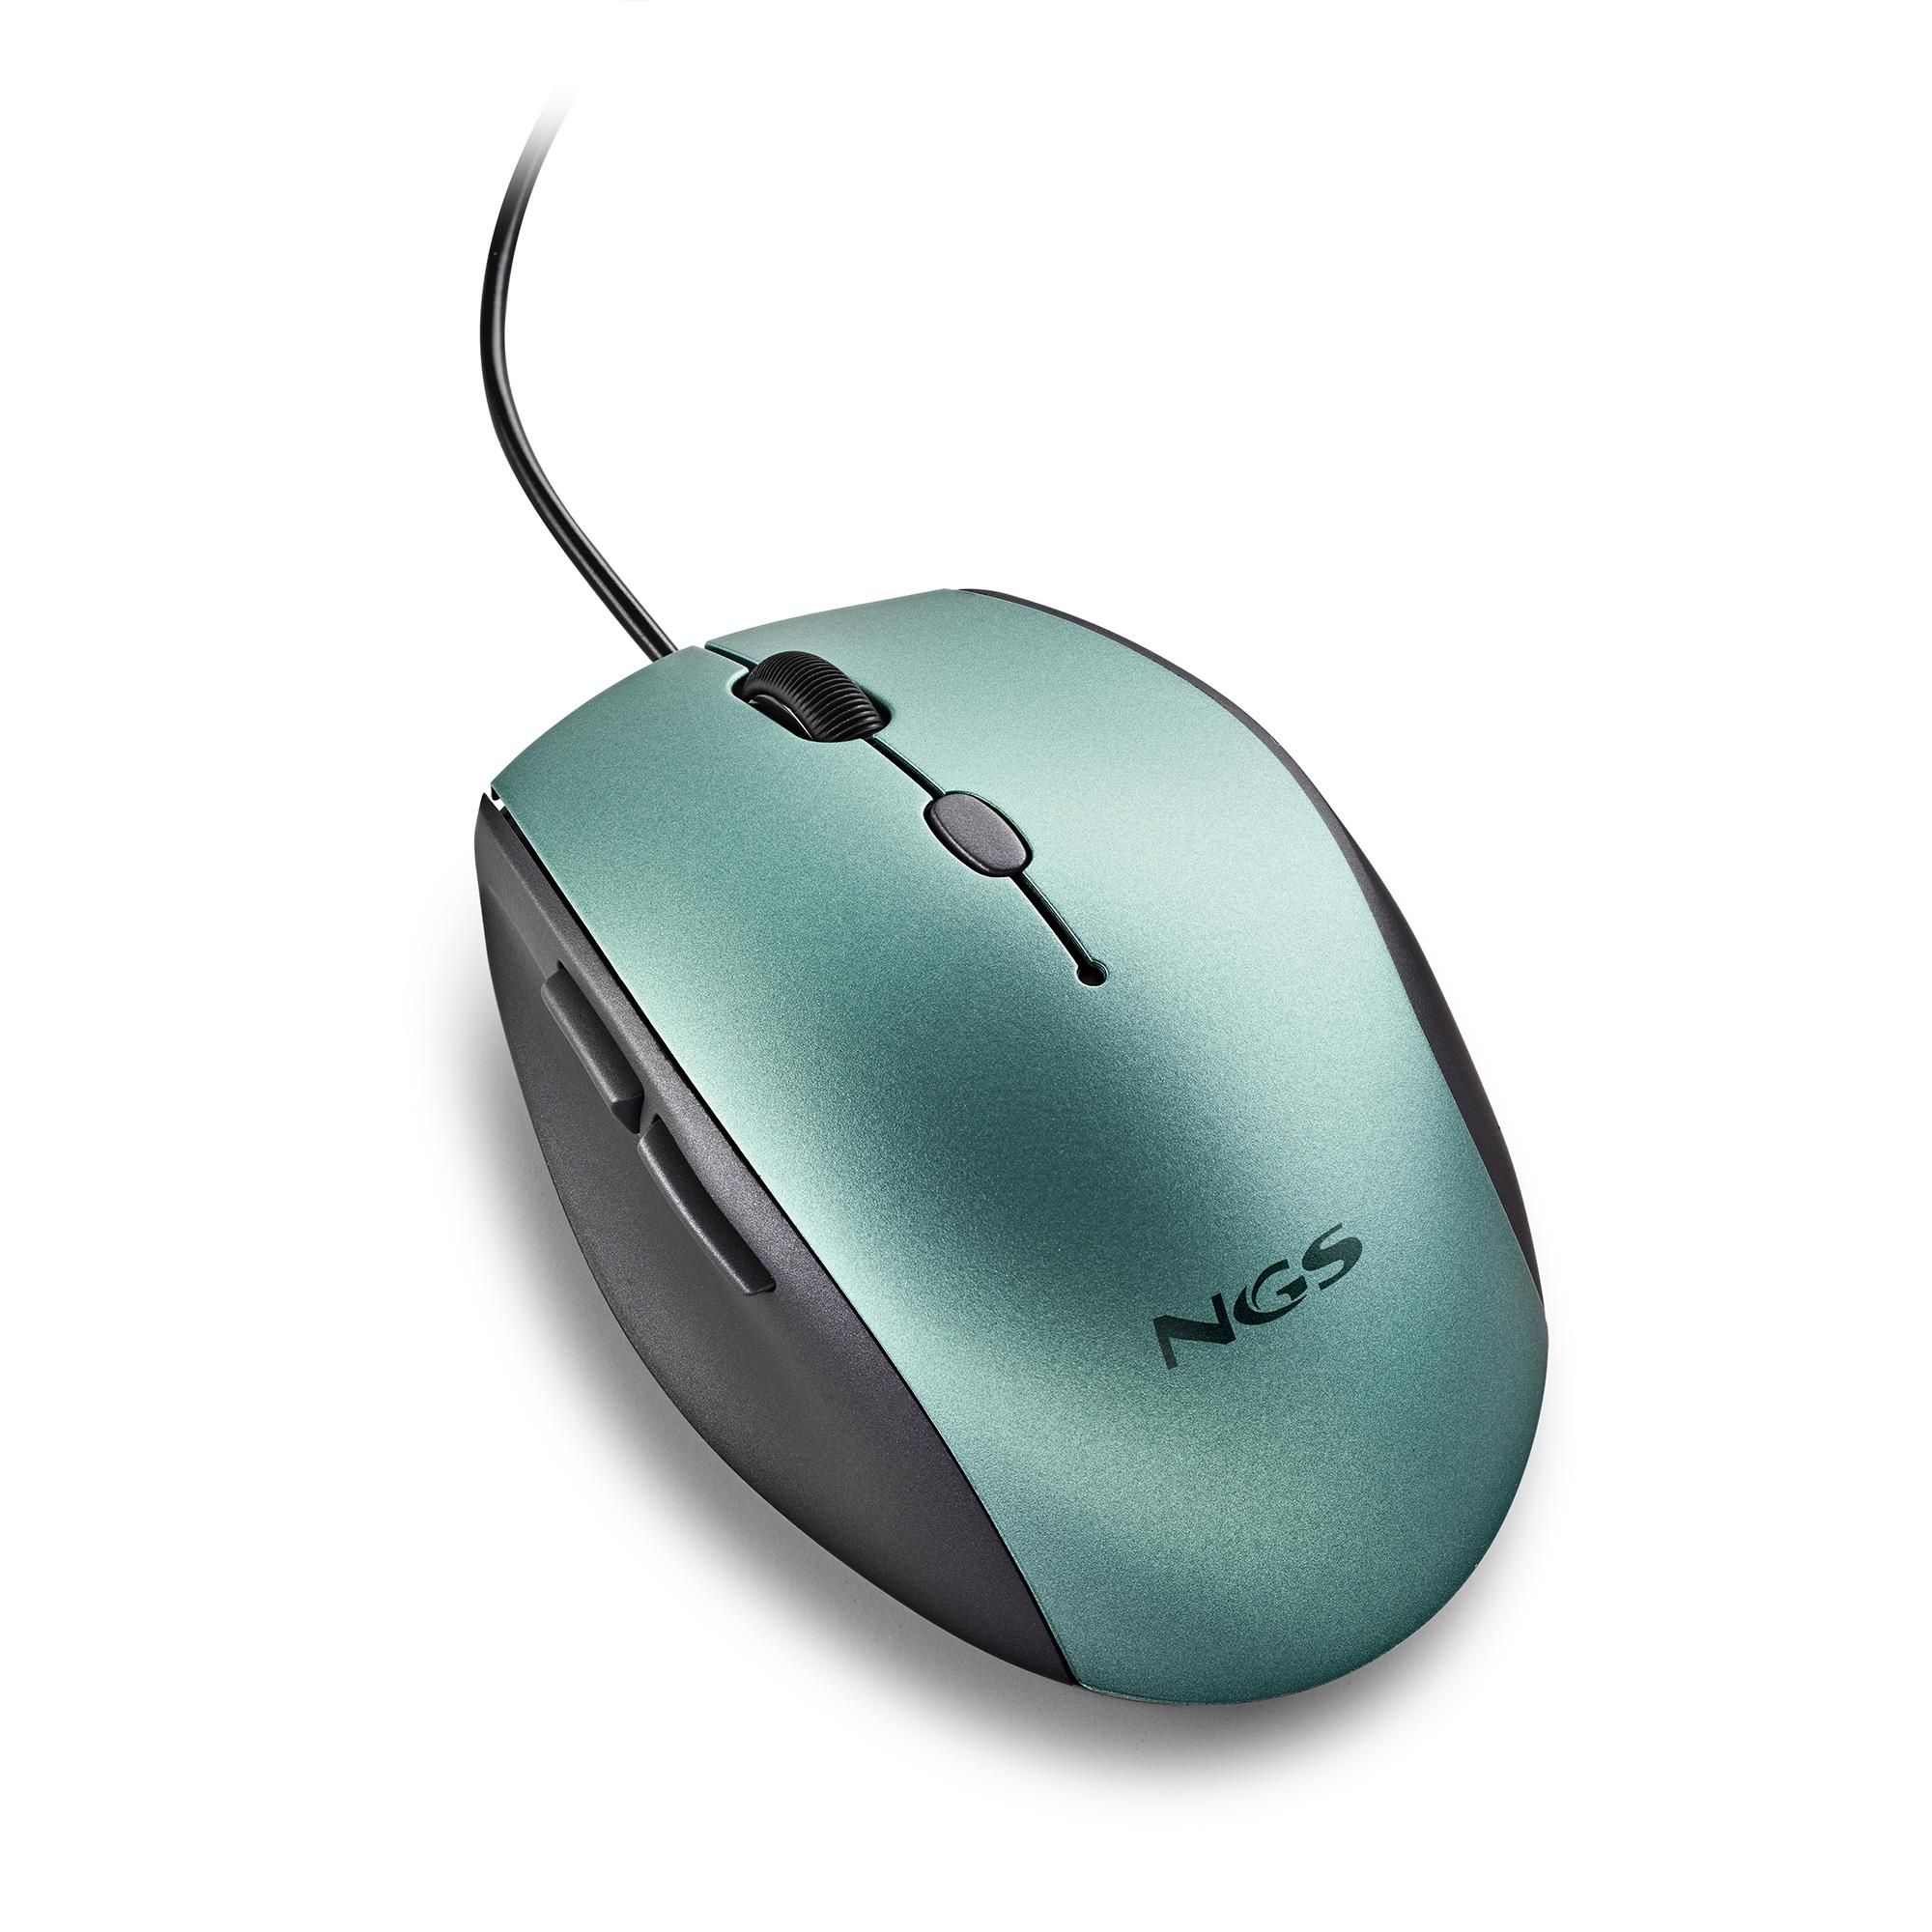 NGS-MOUSE-1238 Foto: 3